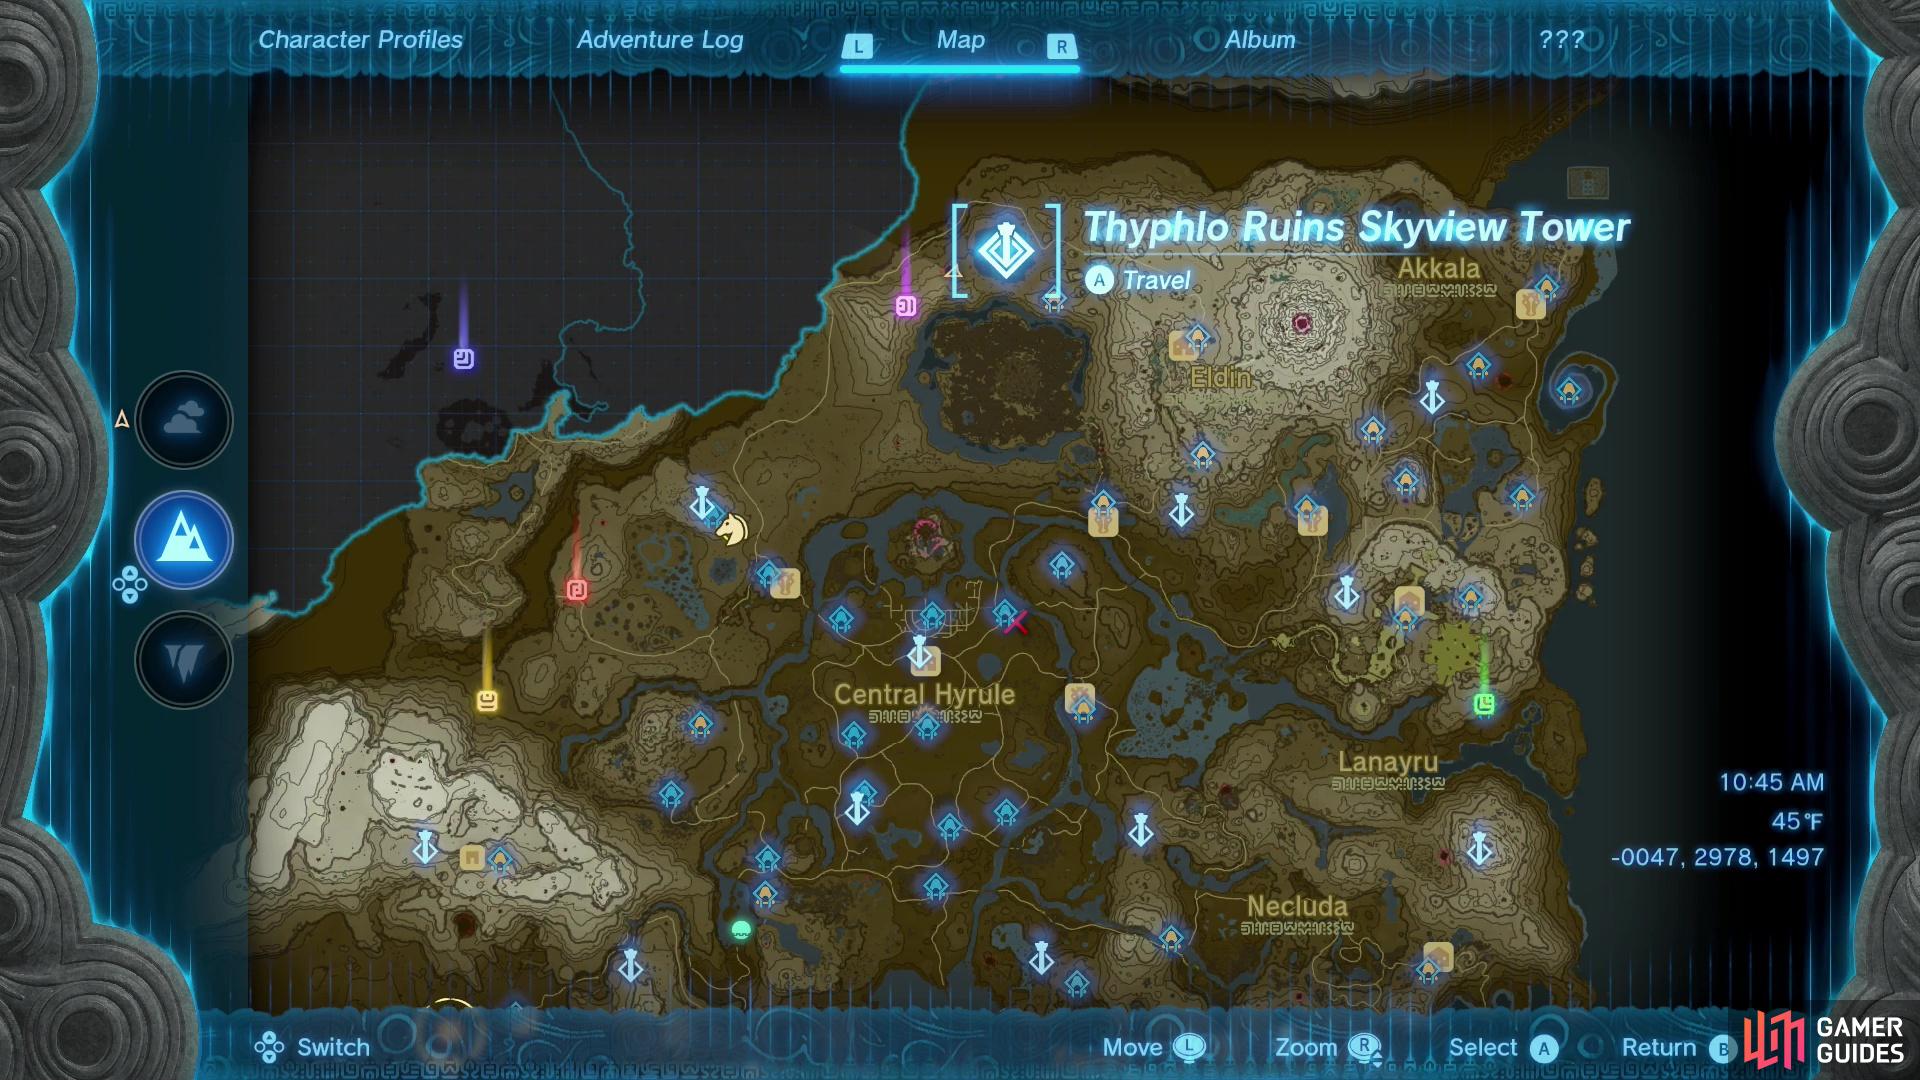 The Thyphlo Ruins Skyview Tower can be found along the northern end of Hyrule, north of the Great Hyrule Forest.